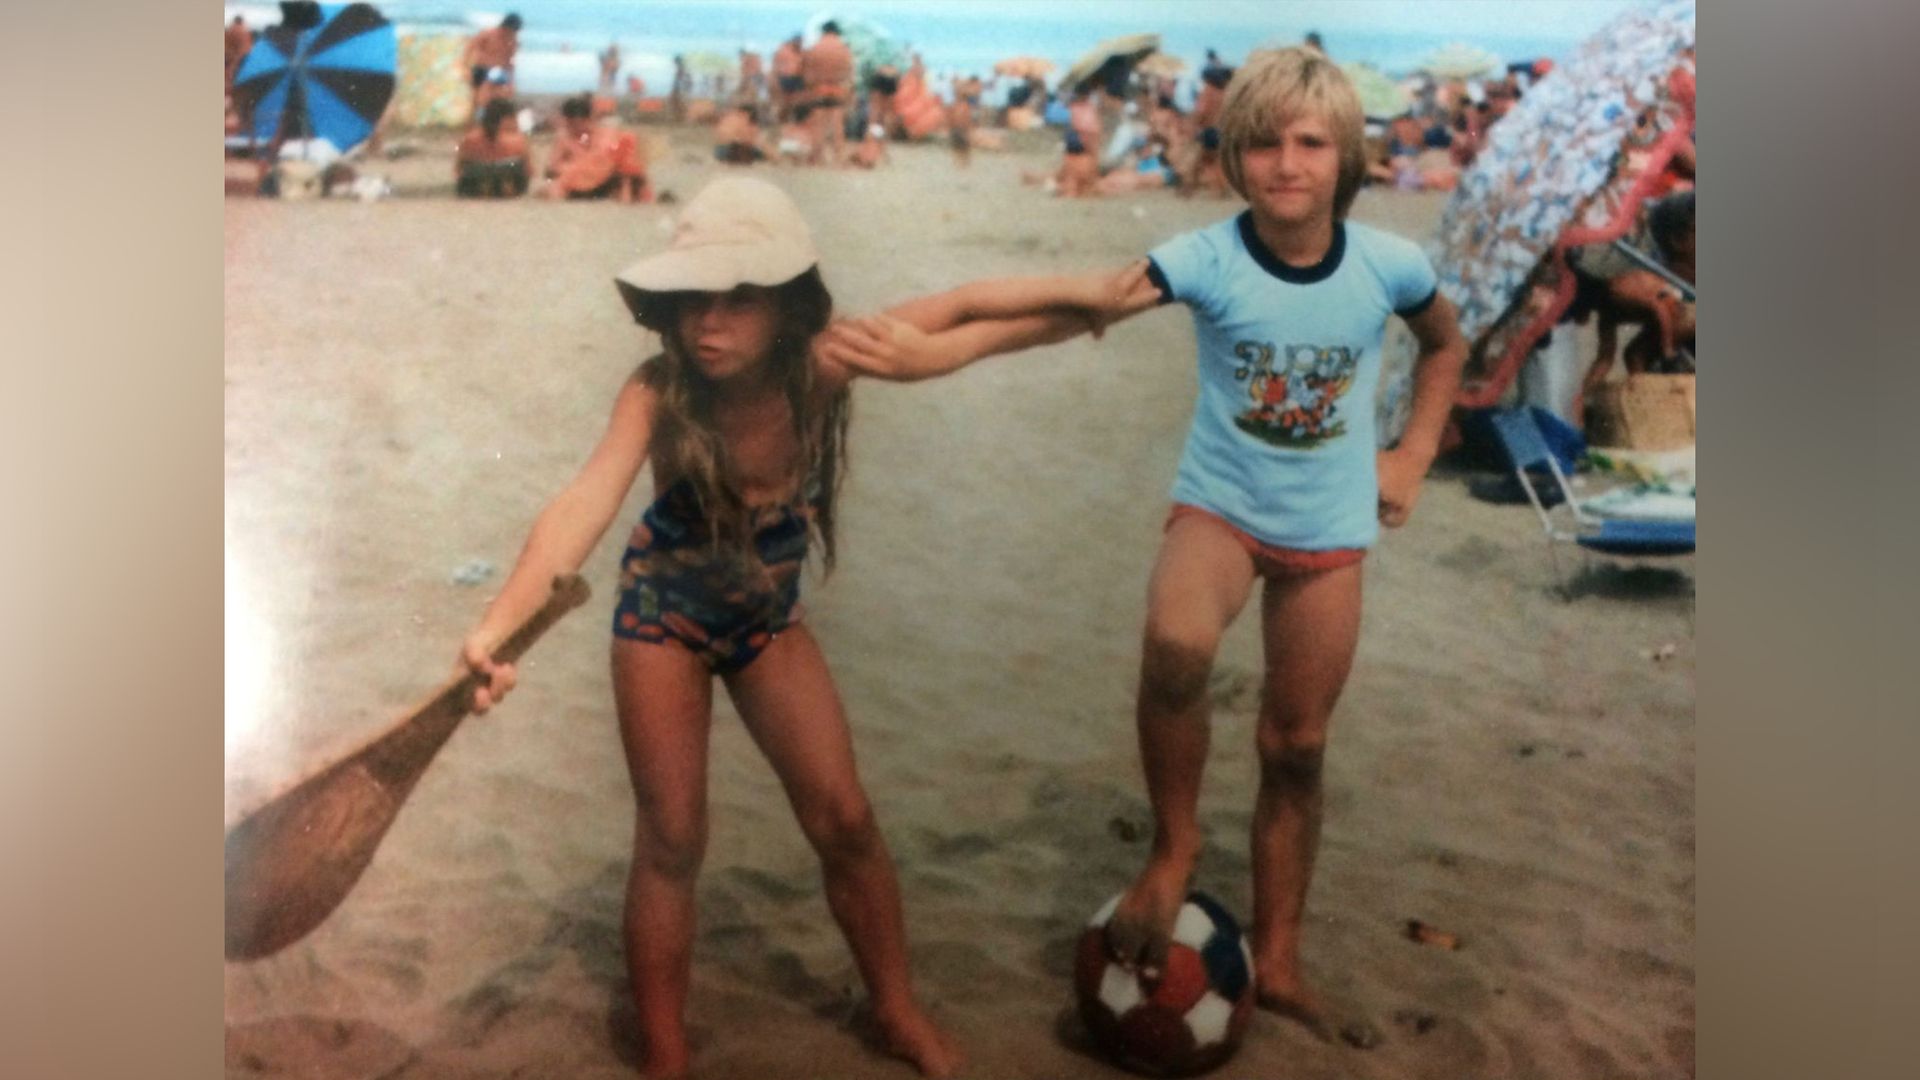 Javier Miley with his sister in childhood